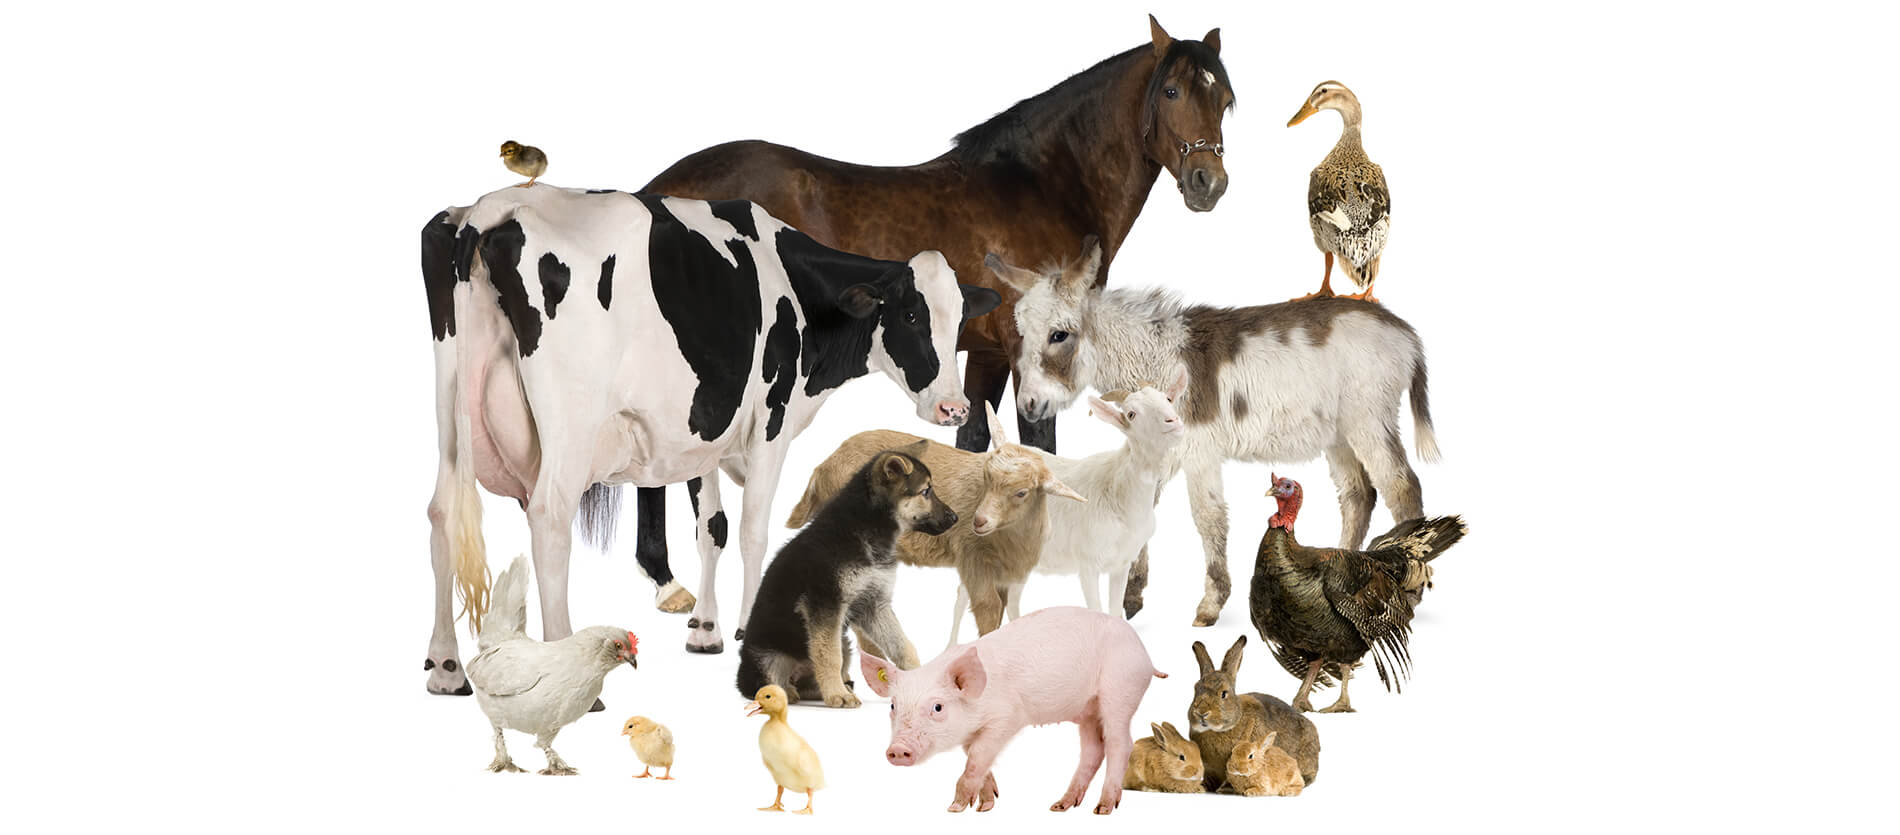 Farm animals including horse, cow, goat, sheep, chicken, piglet, turkey and ducks